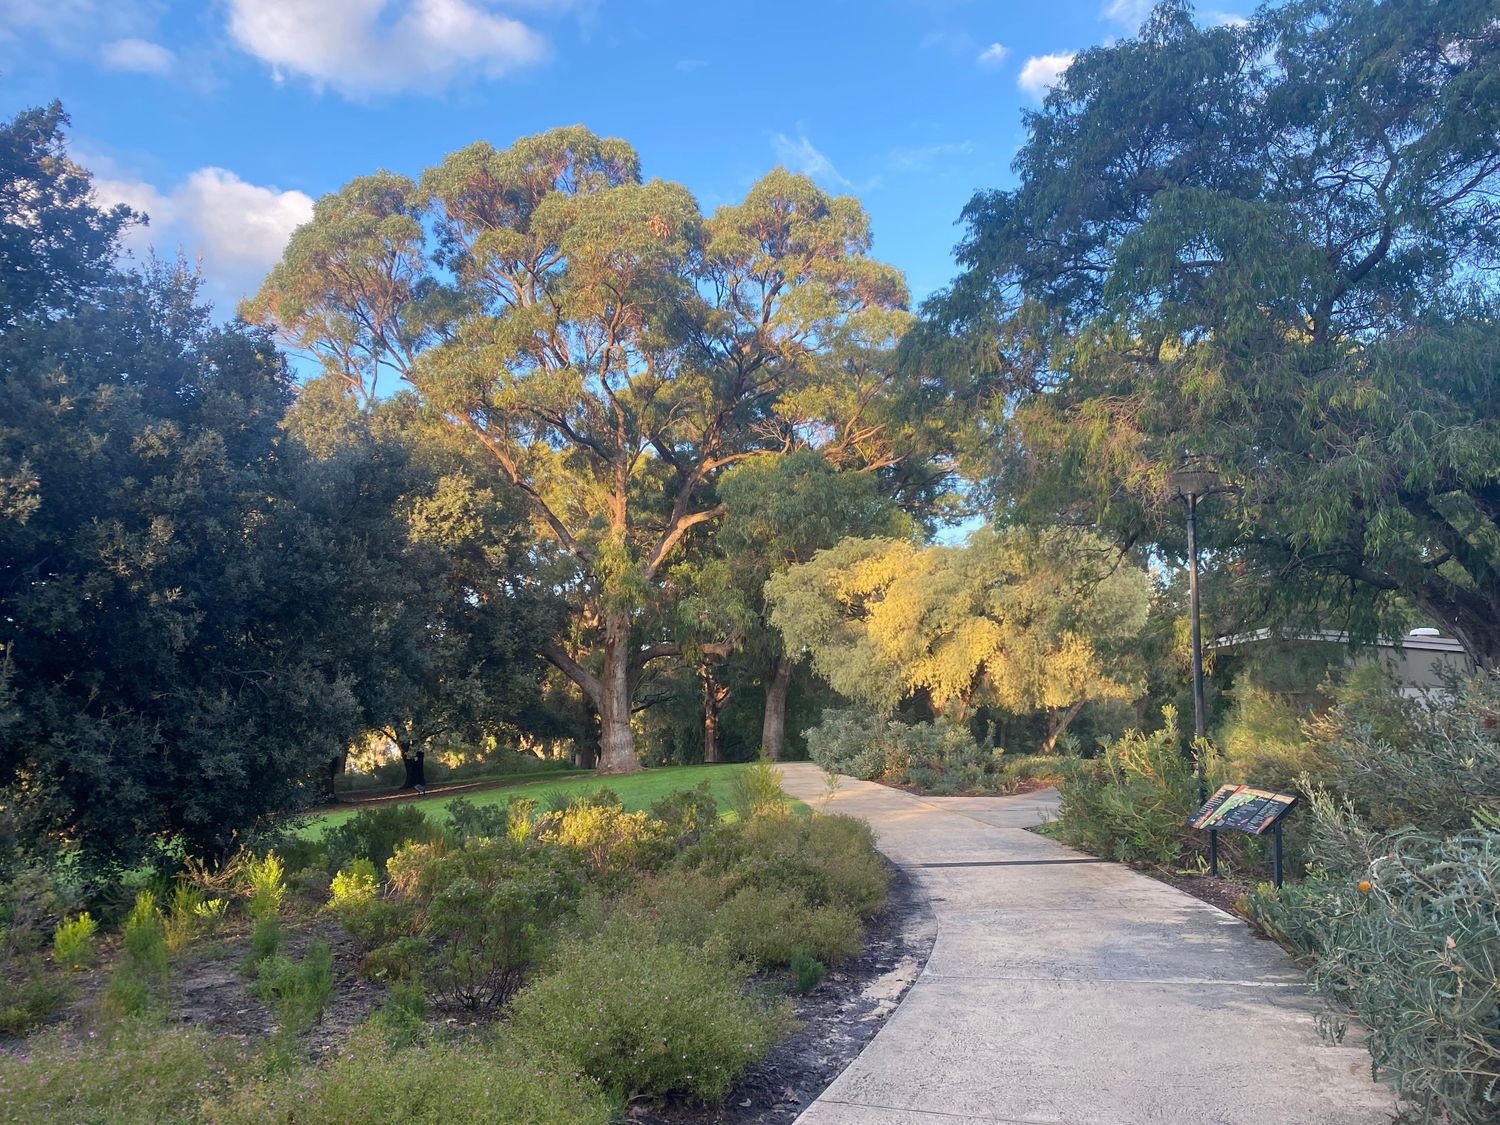 Gallery Photo of Kings Park Botanical Gardens is a great spot for Walk and Talk Sessions